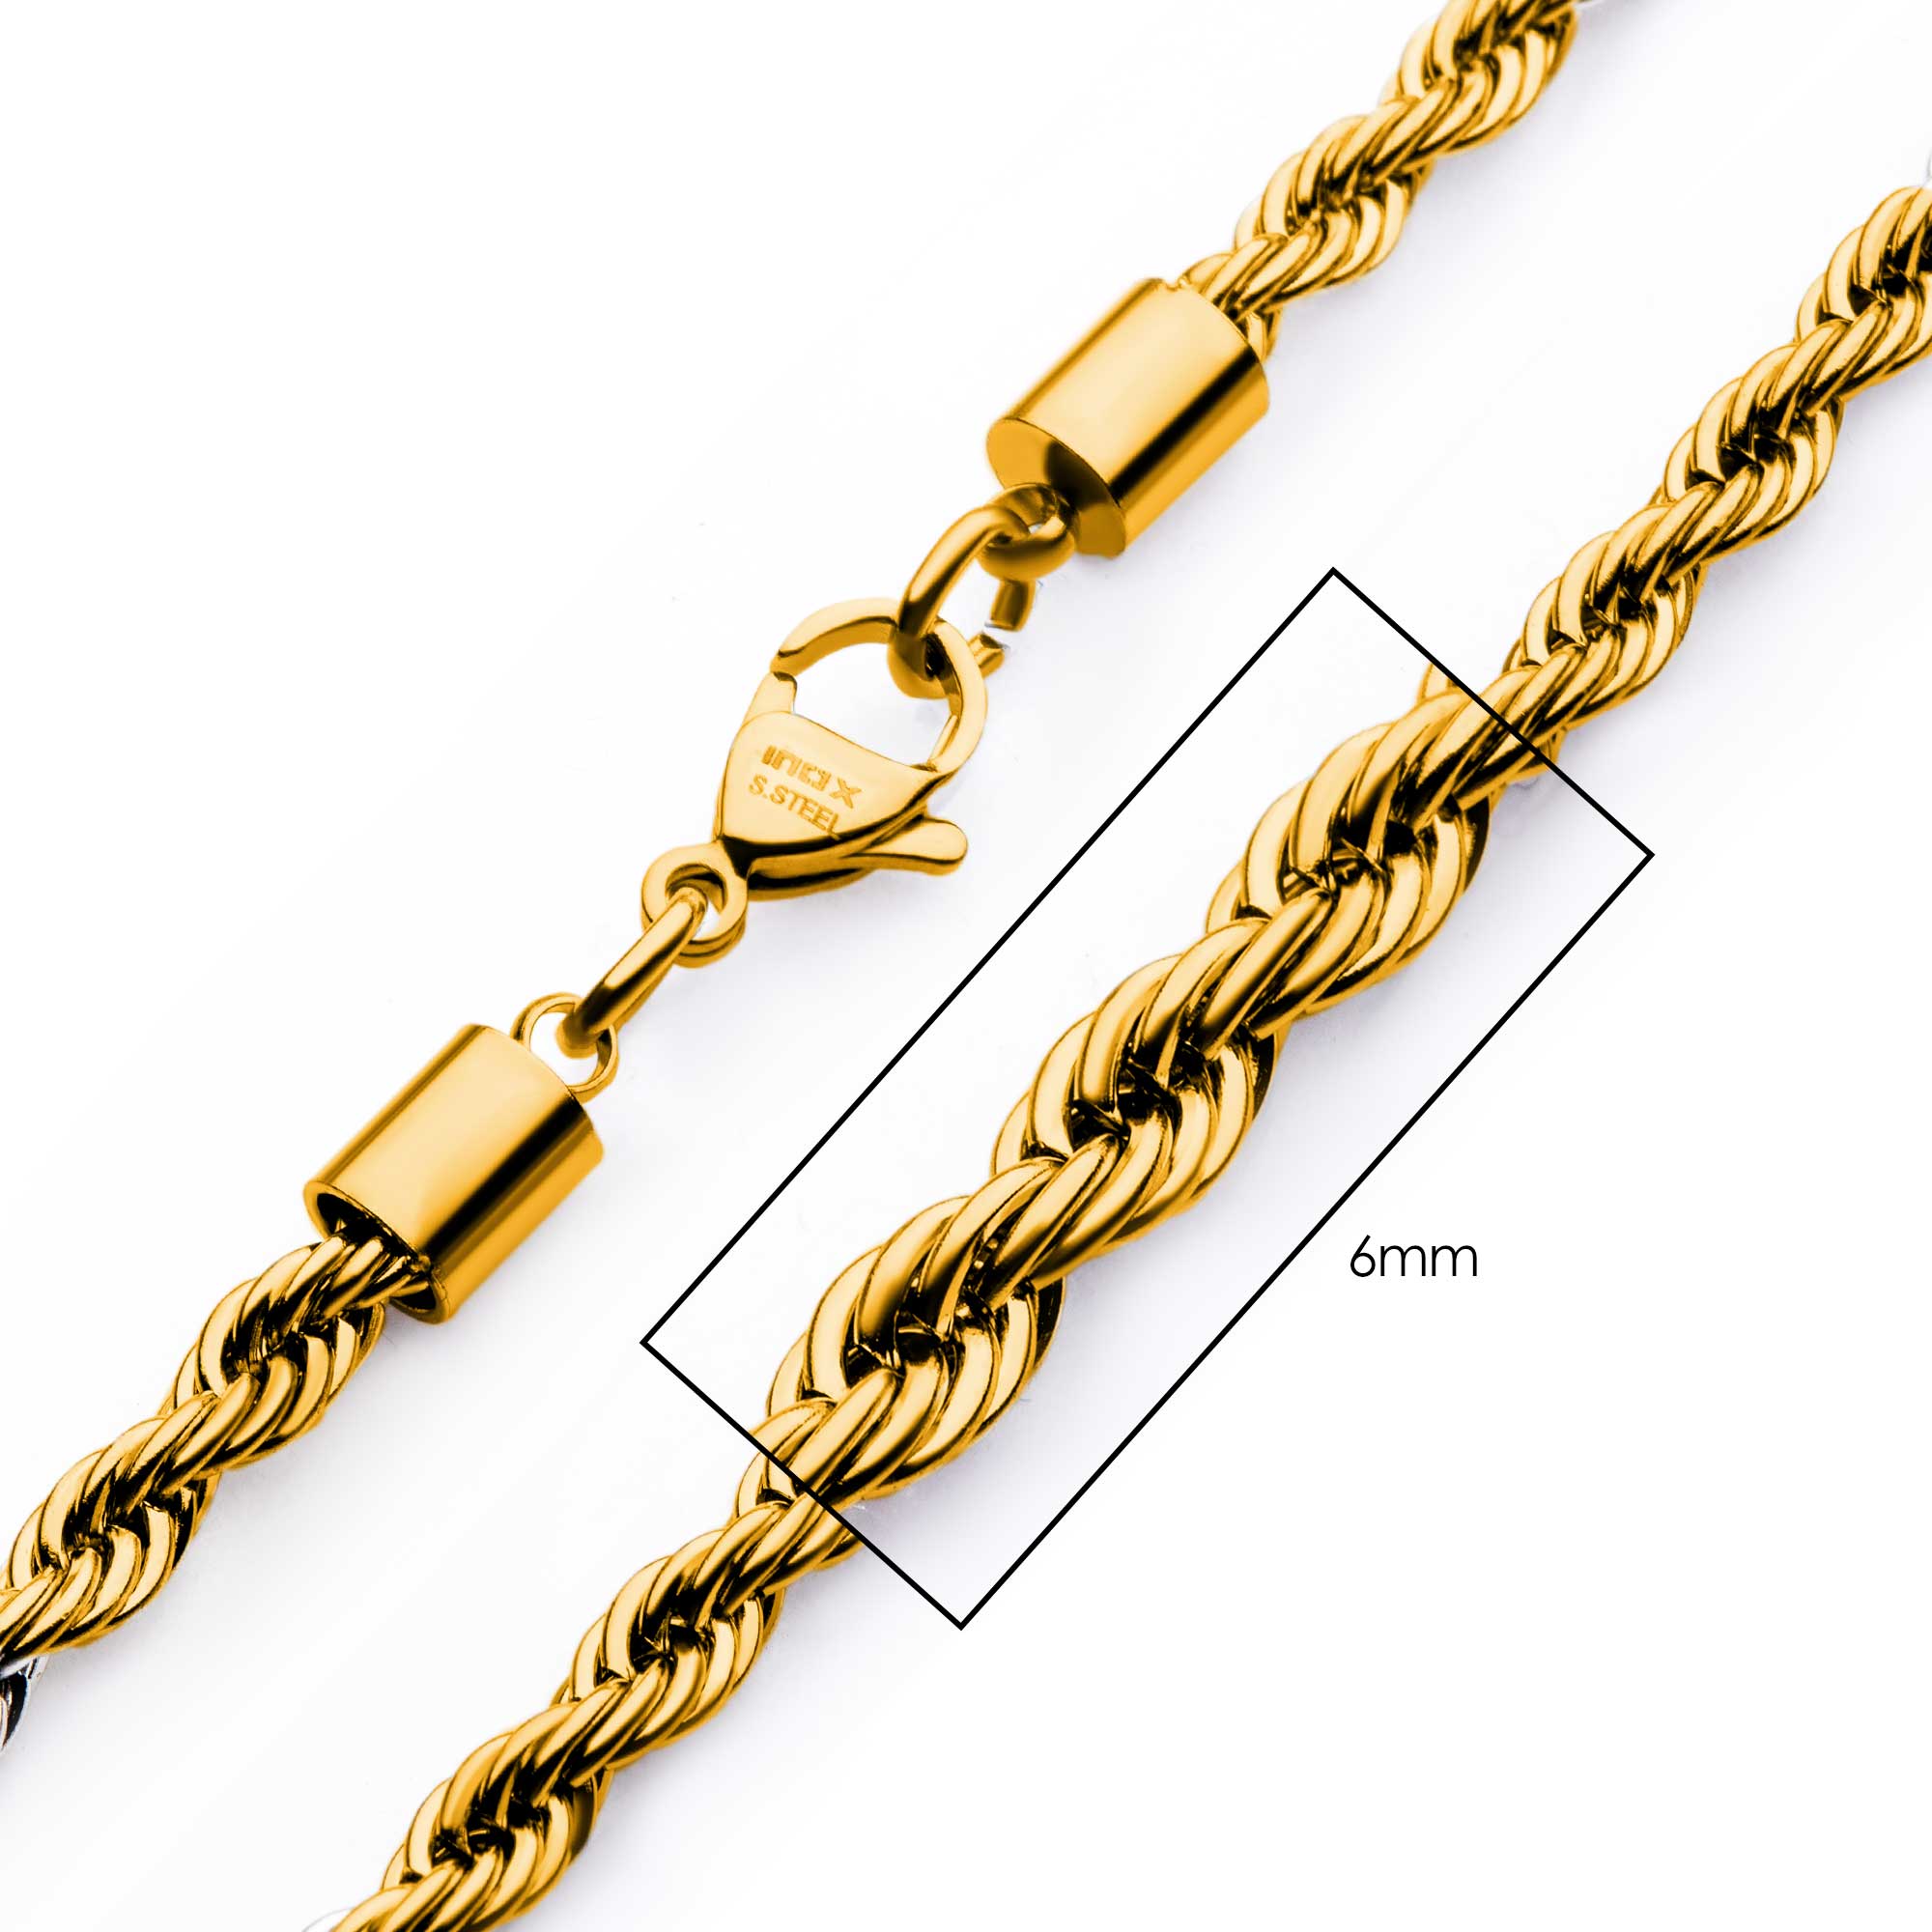 6mm 18K Gold Plated Rope Chain P.K. Bennett Jewelers Mundelein, IL